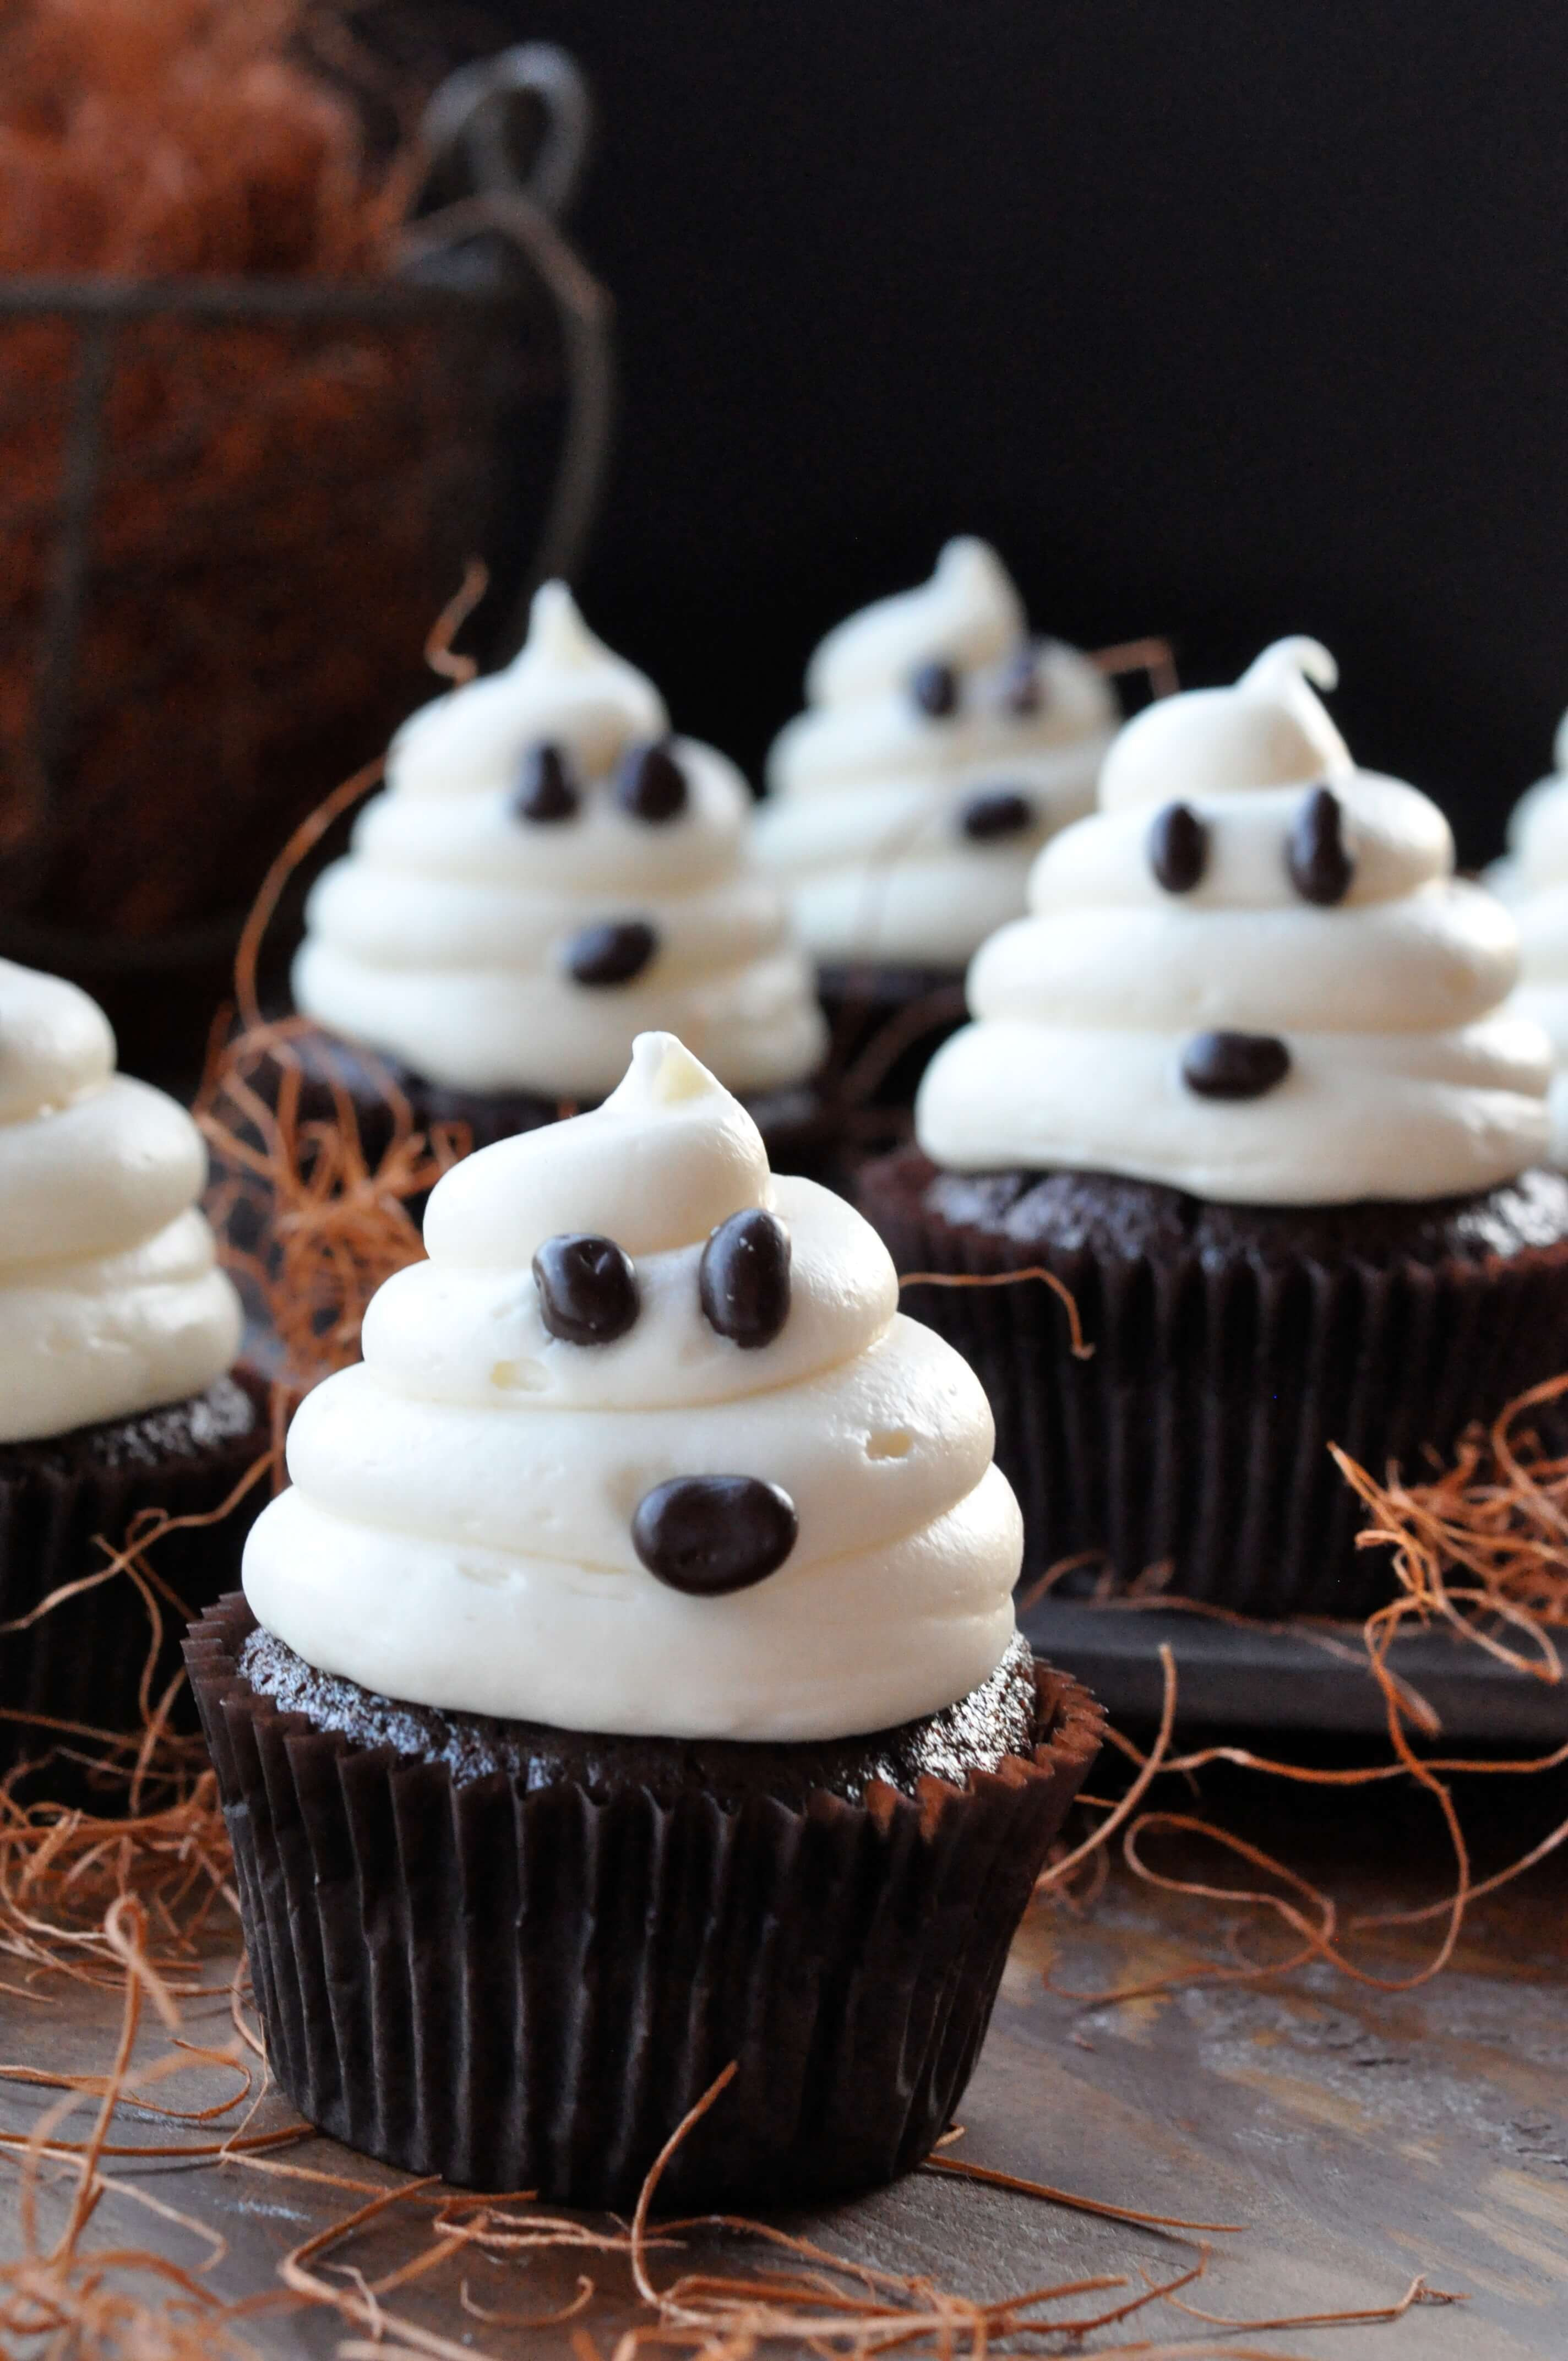 Simple Halloween Cupcakes
 Halloween Ghosts on Carrot Cake Recipe—Fast and Easy